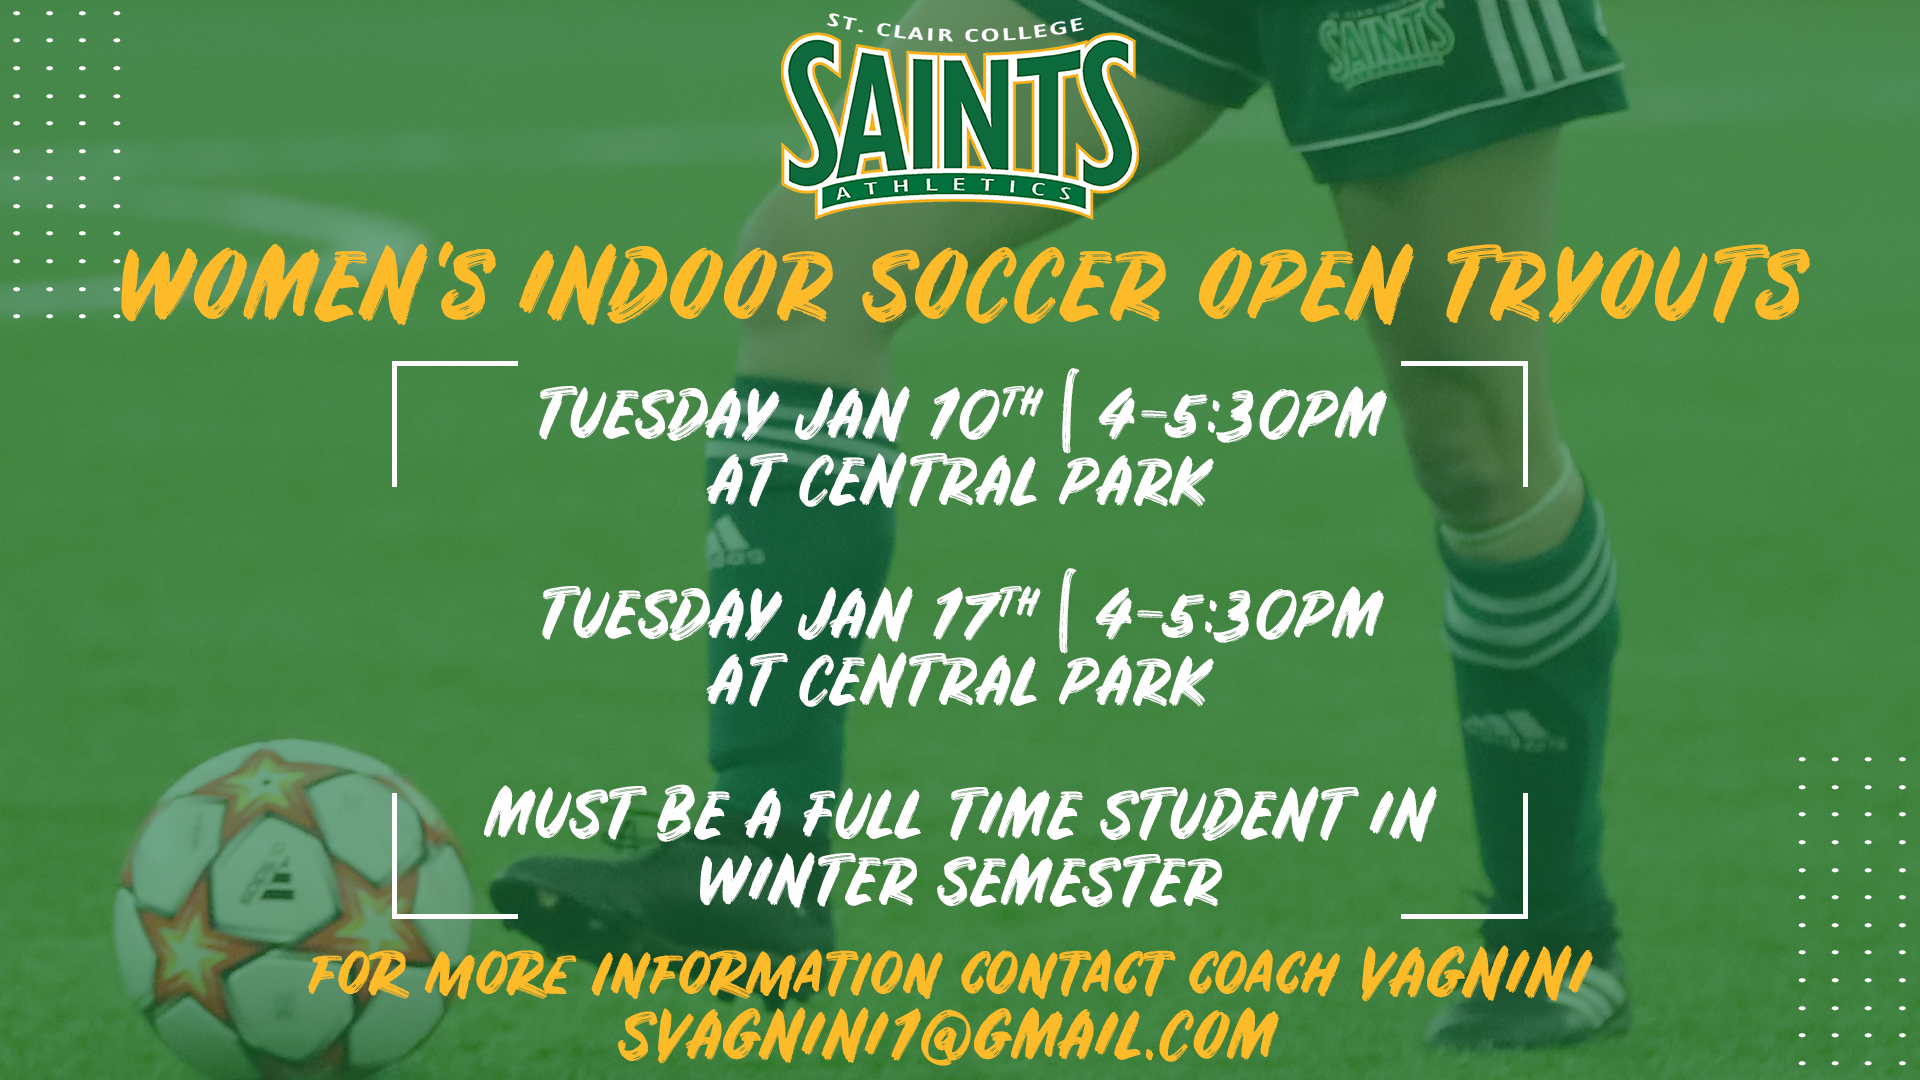 Women's Indoor Varsity Soccer Tryout Dates Announced